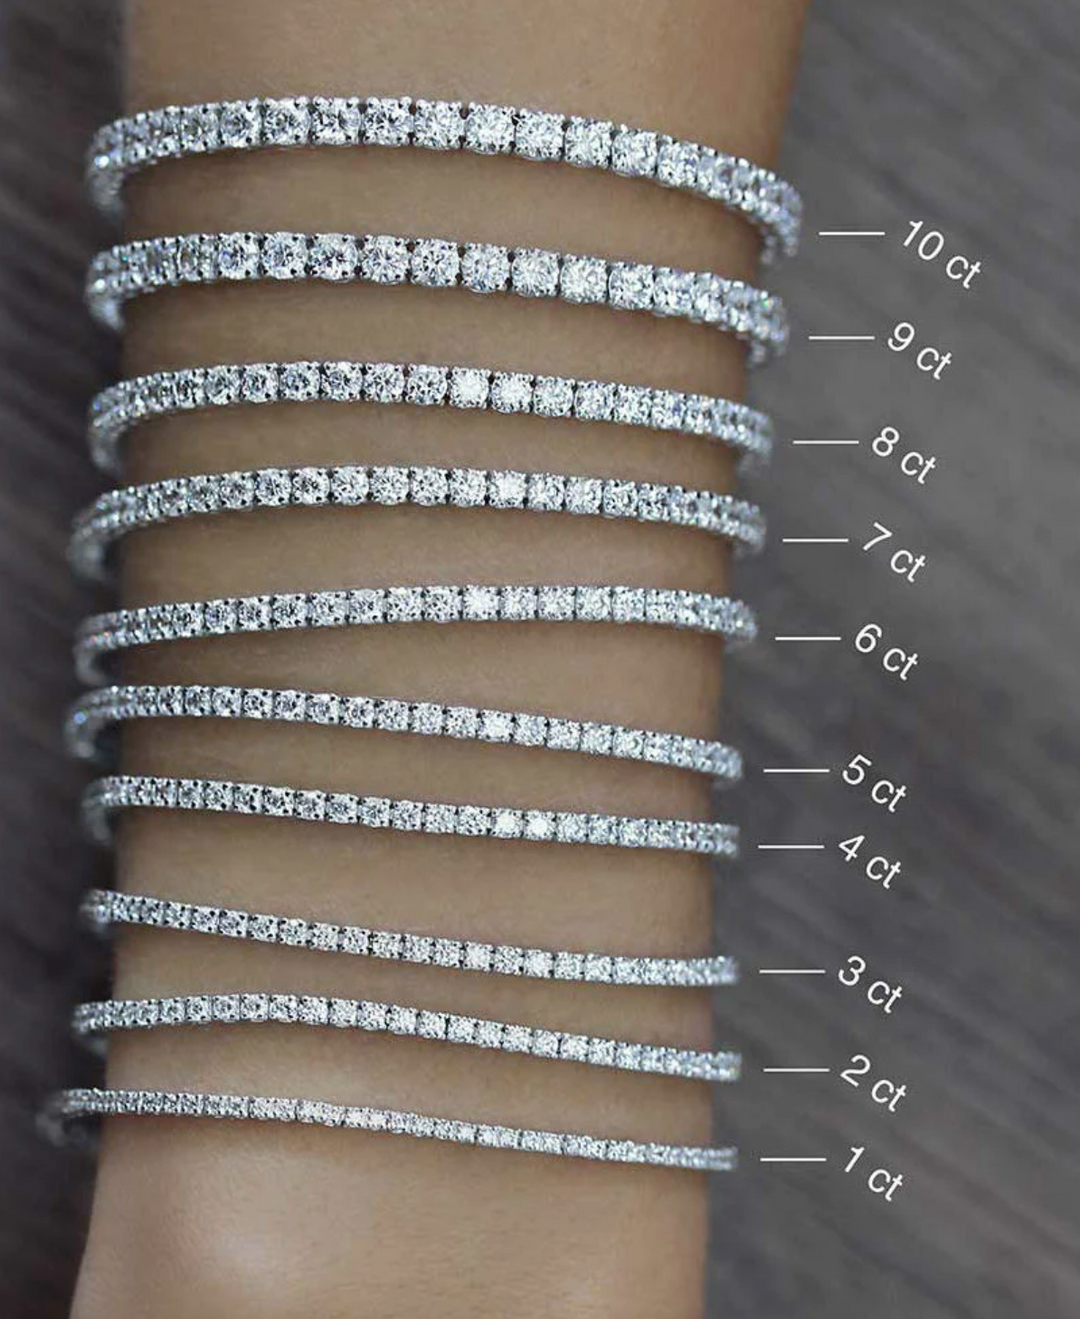 sizing comparison of the 1 to 10 ct diamonds on the tennis bracelet